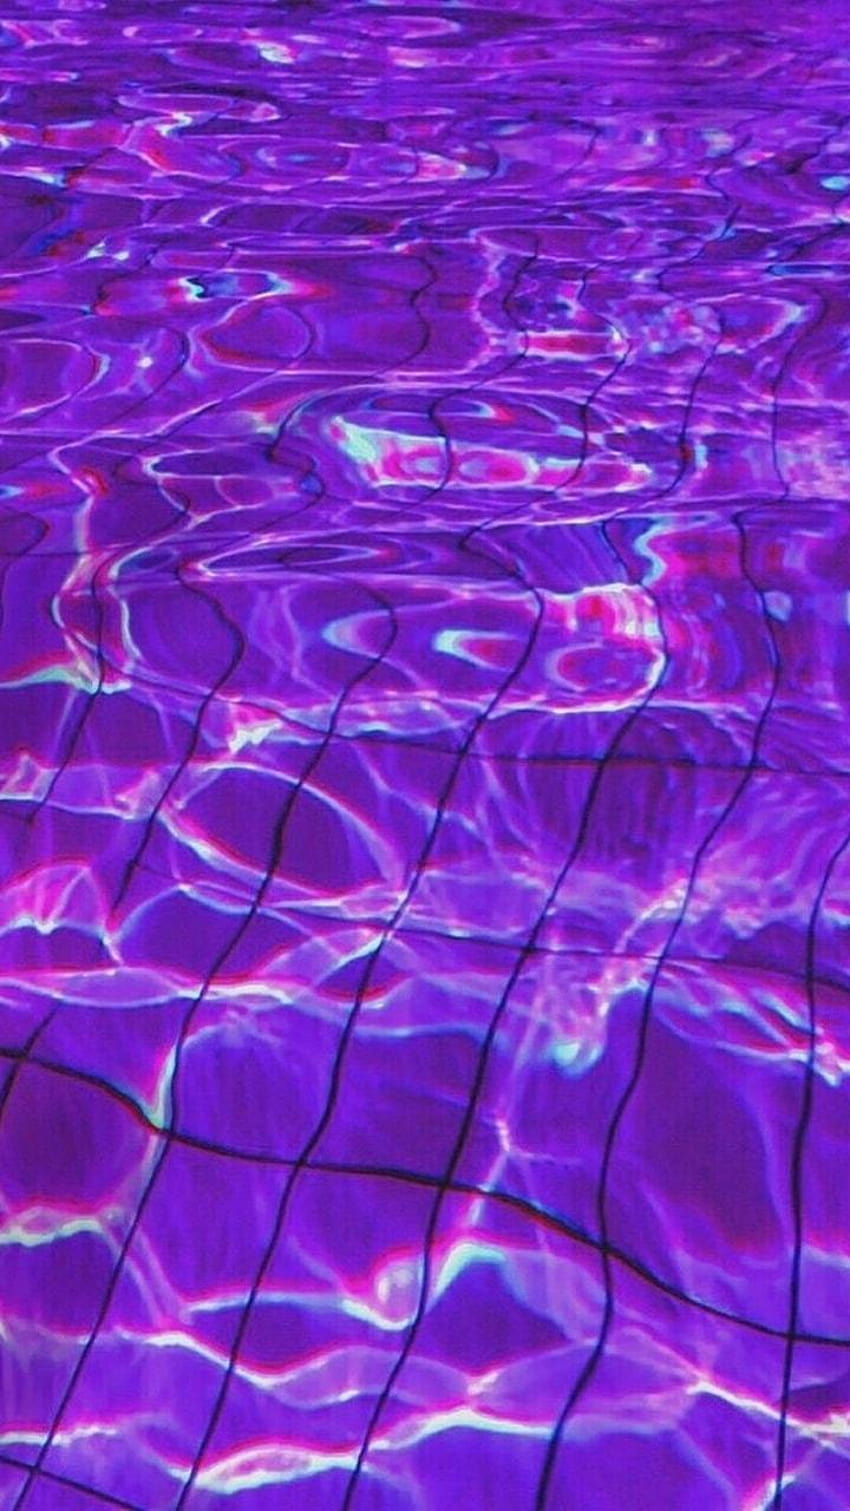 Amazing Water Live Wallpaper Best Android App. technewztop.com